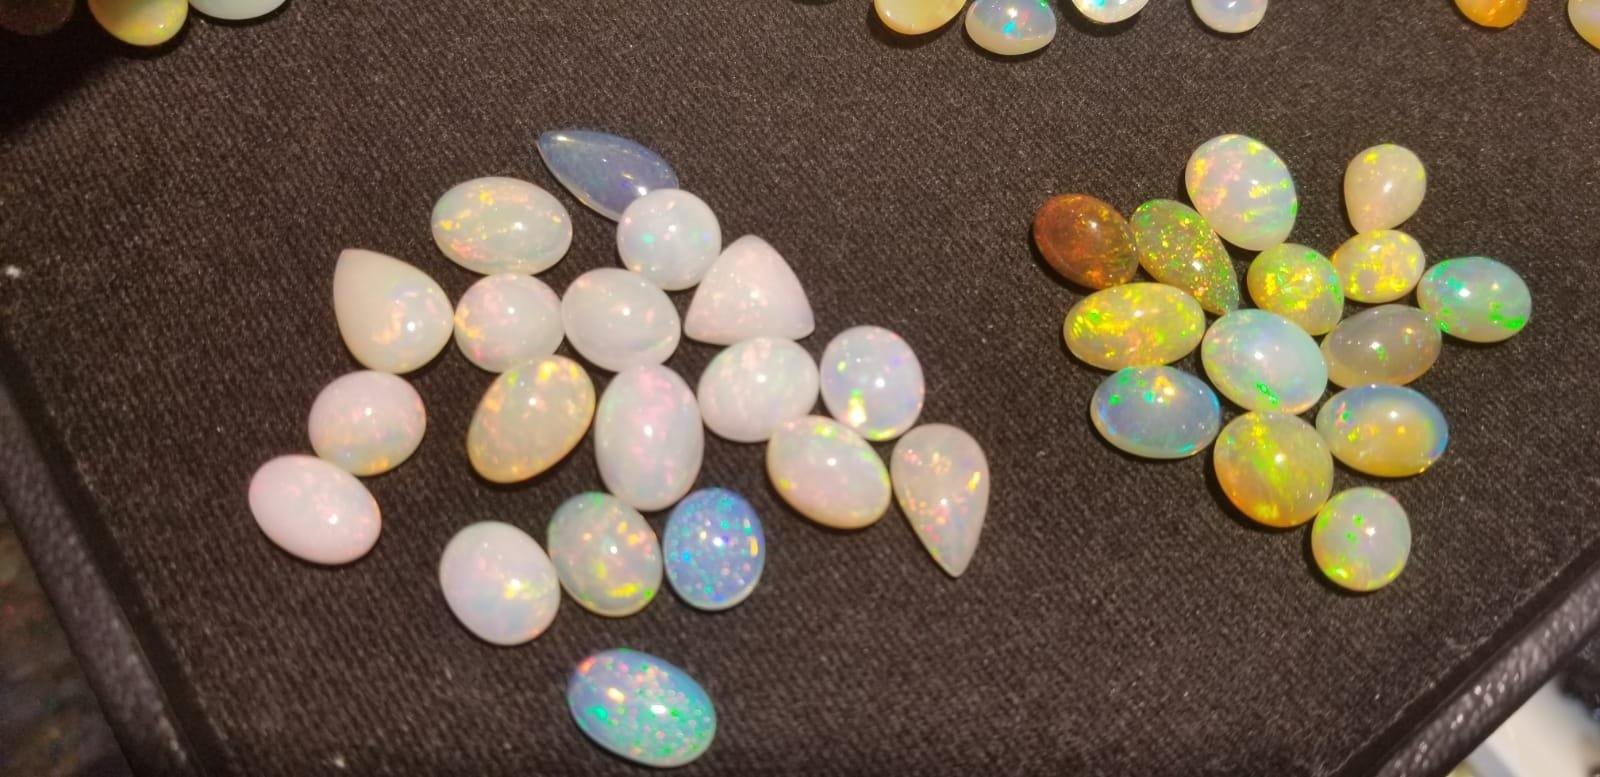 Natural opal from Ethiopia. 3.65 carats. No reserve price